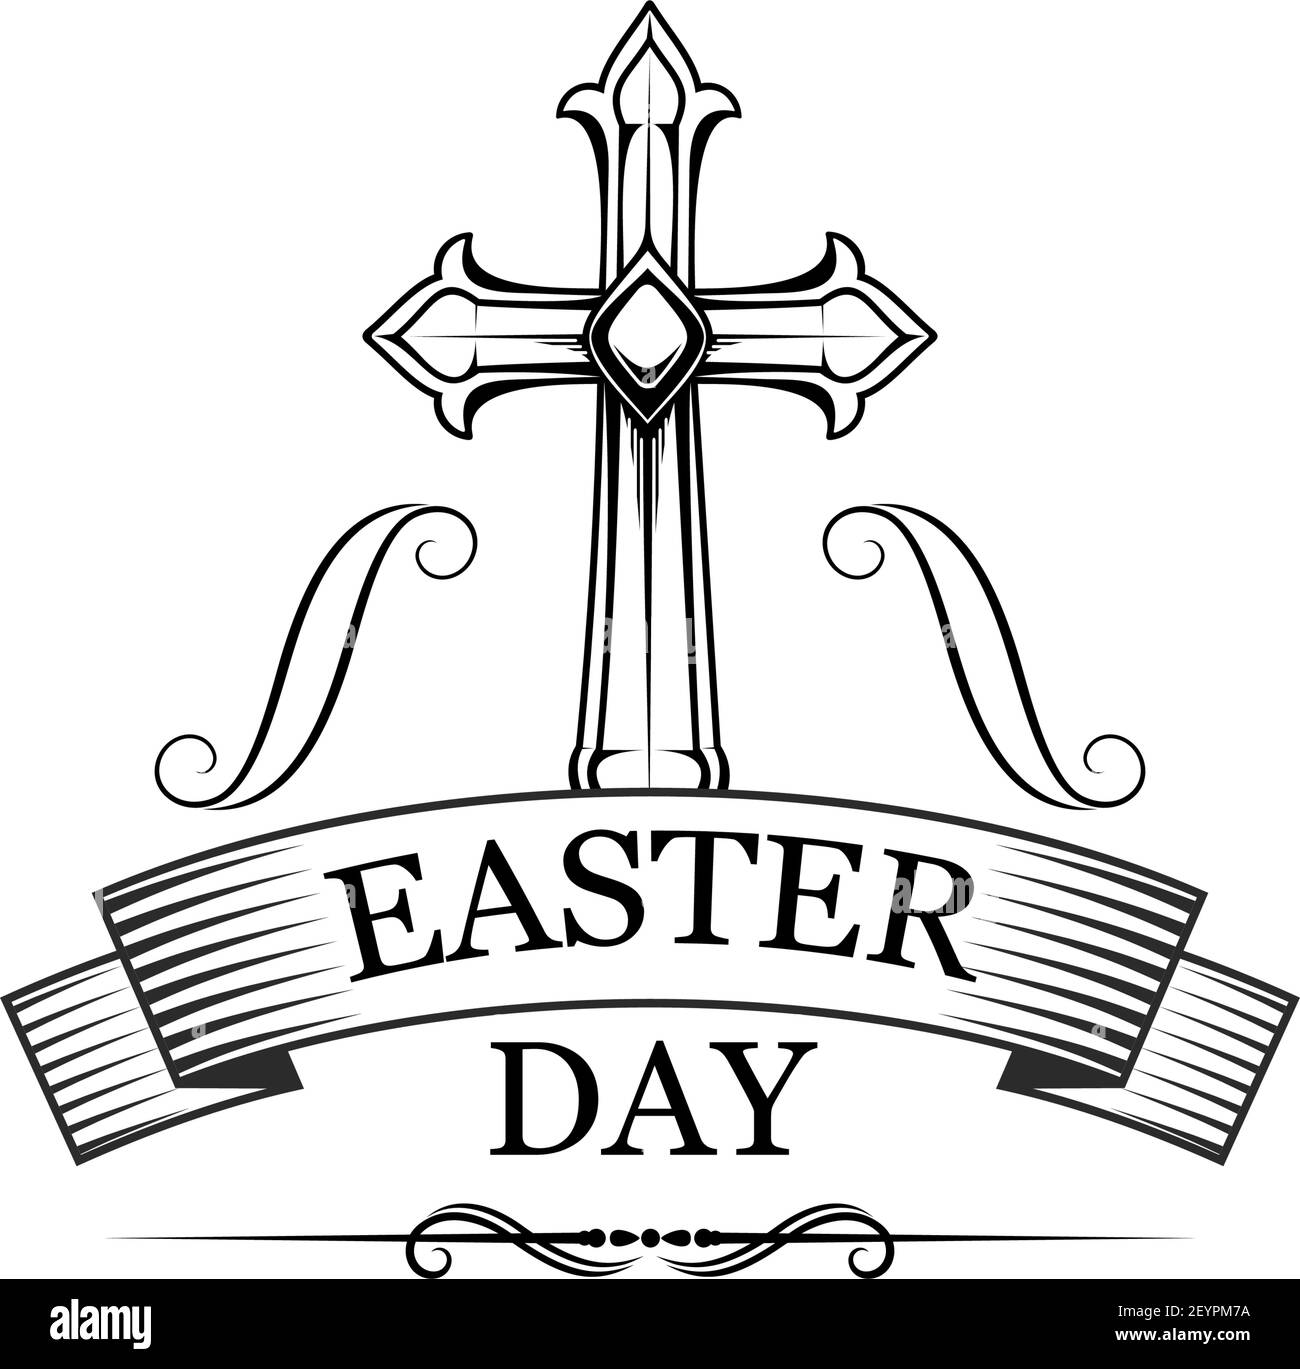 Easter day vector label. Black and white monochrome badge with